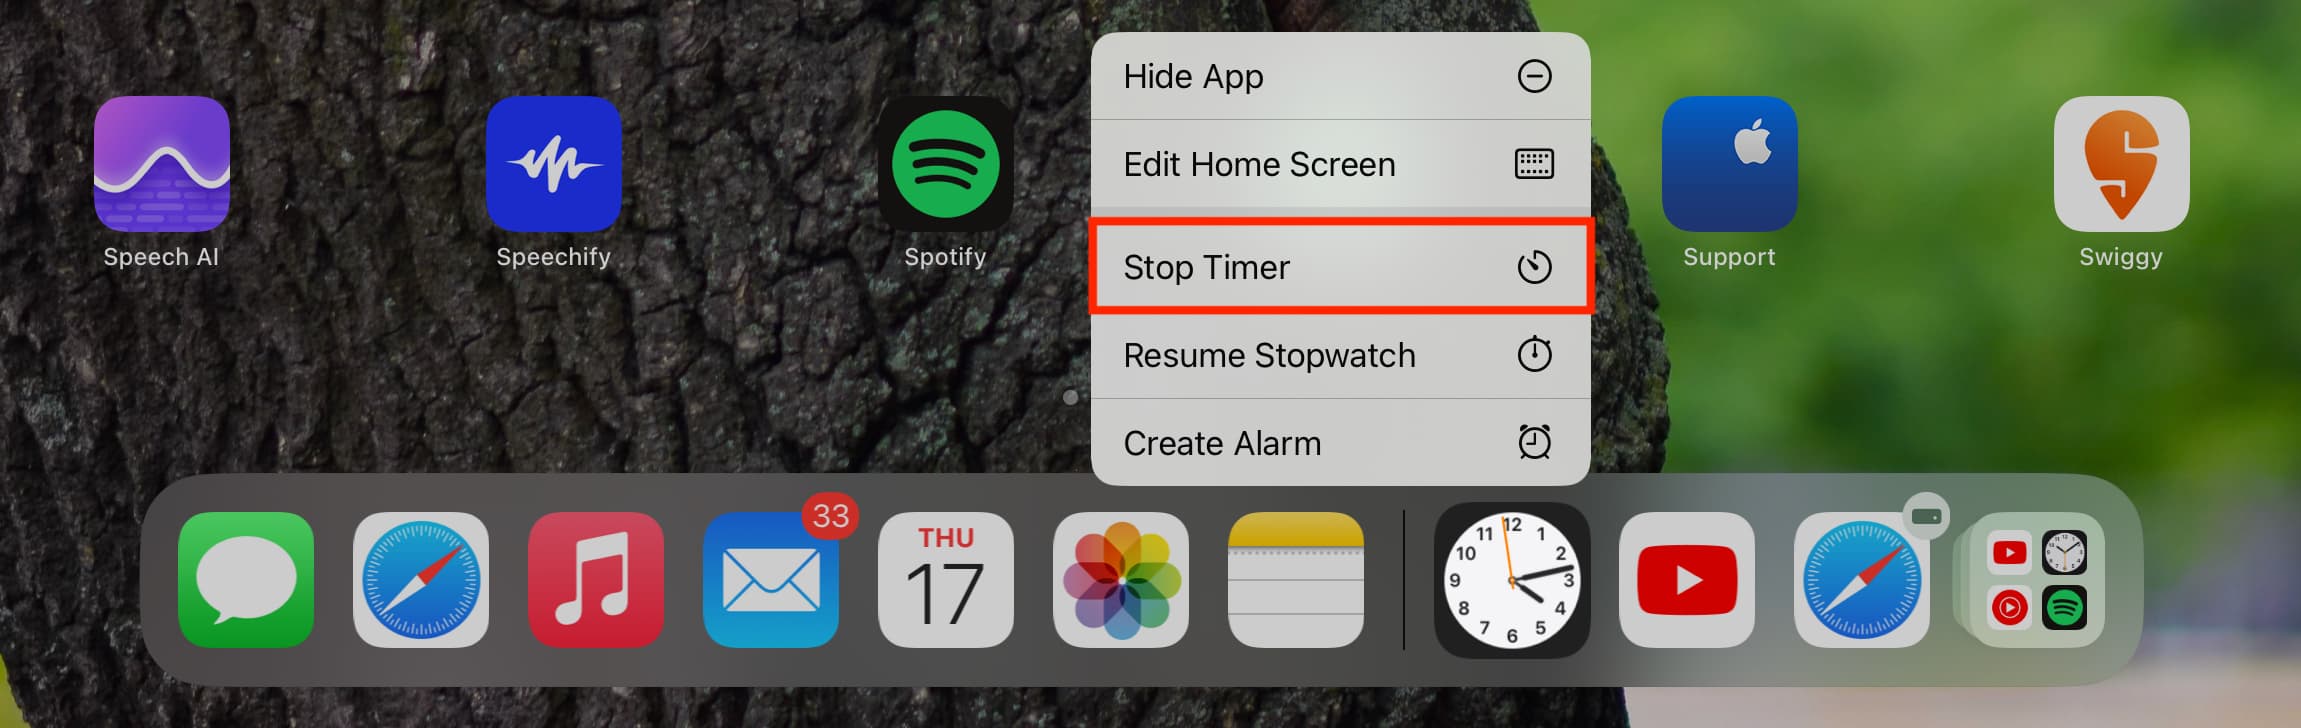 Stop Timer quick action on iPad Home Screen